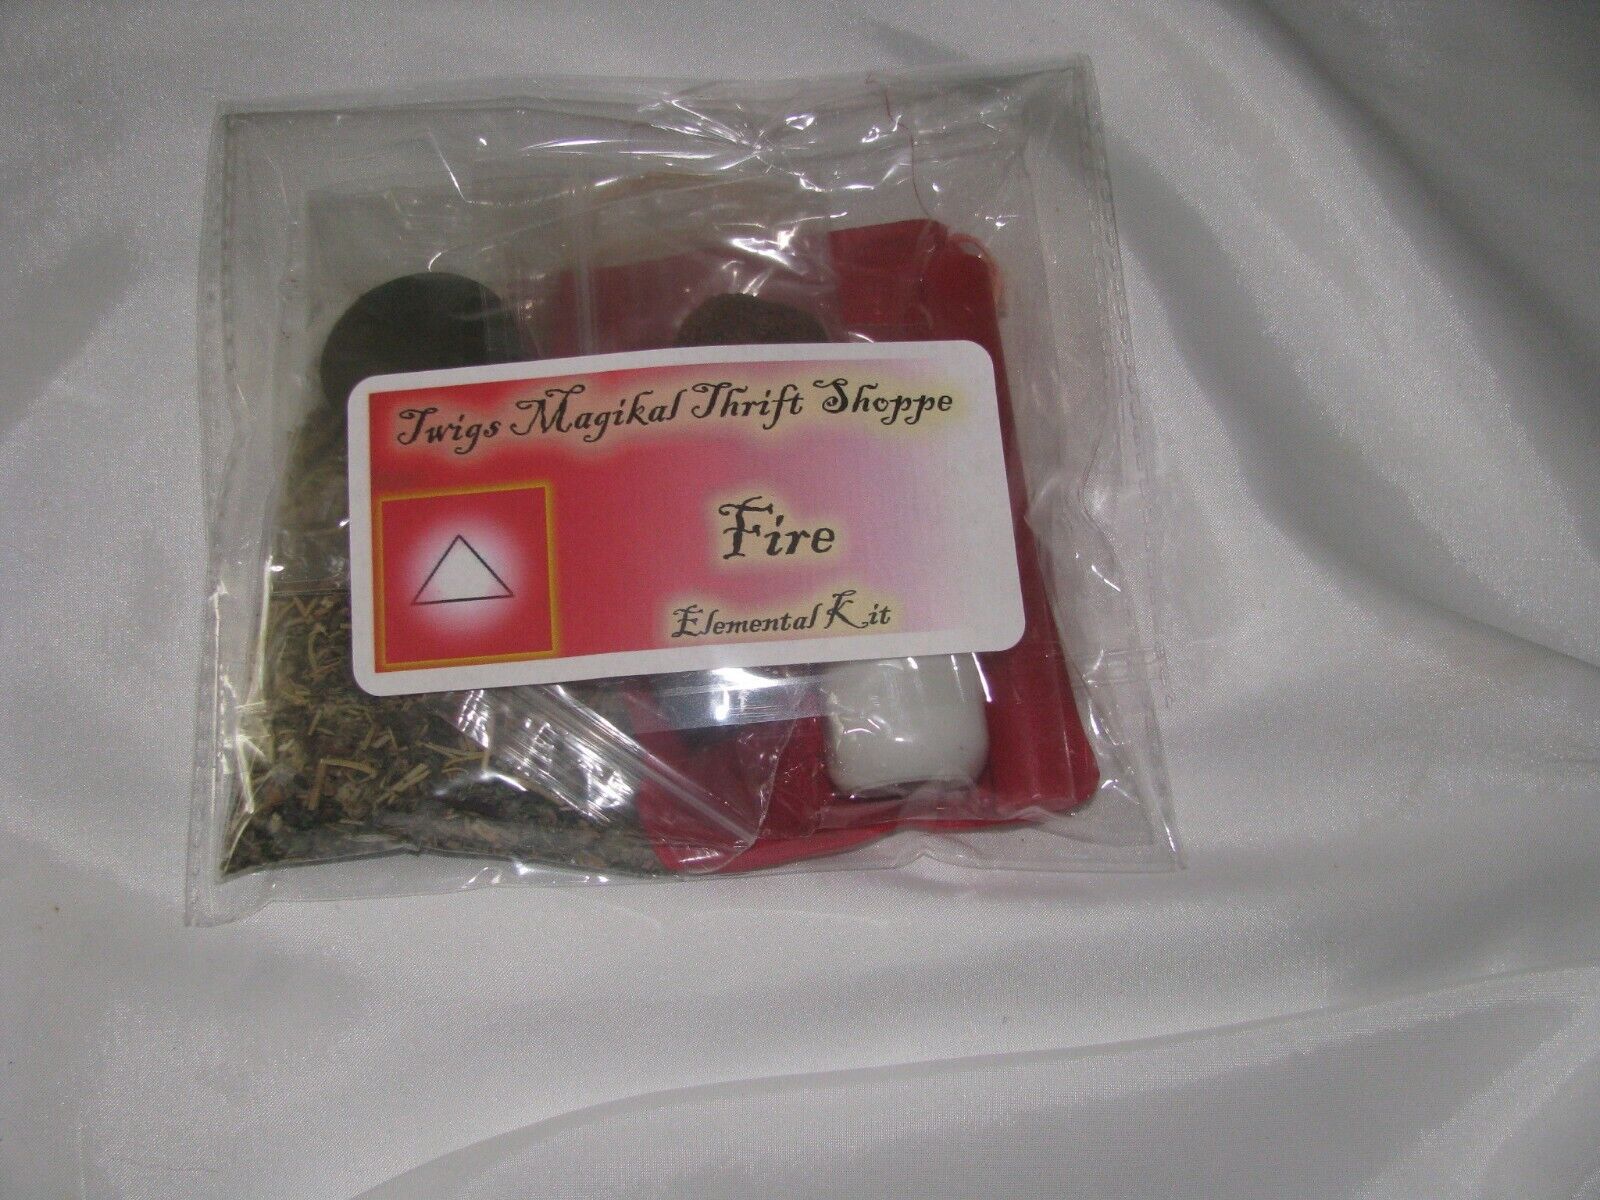 Fire Elemental Kit for Rituals Wicca Pagan